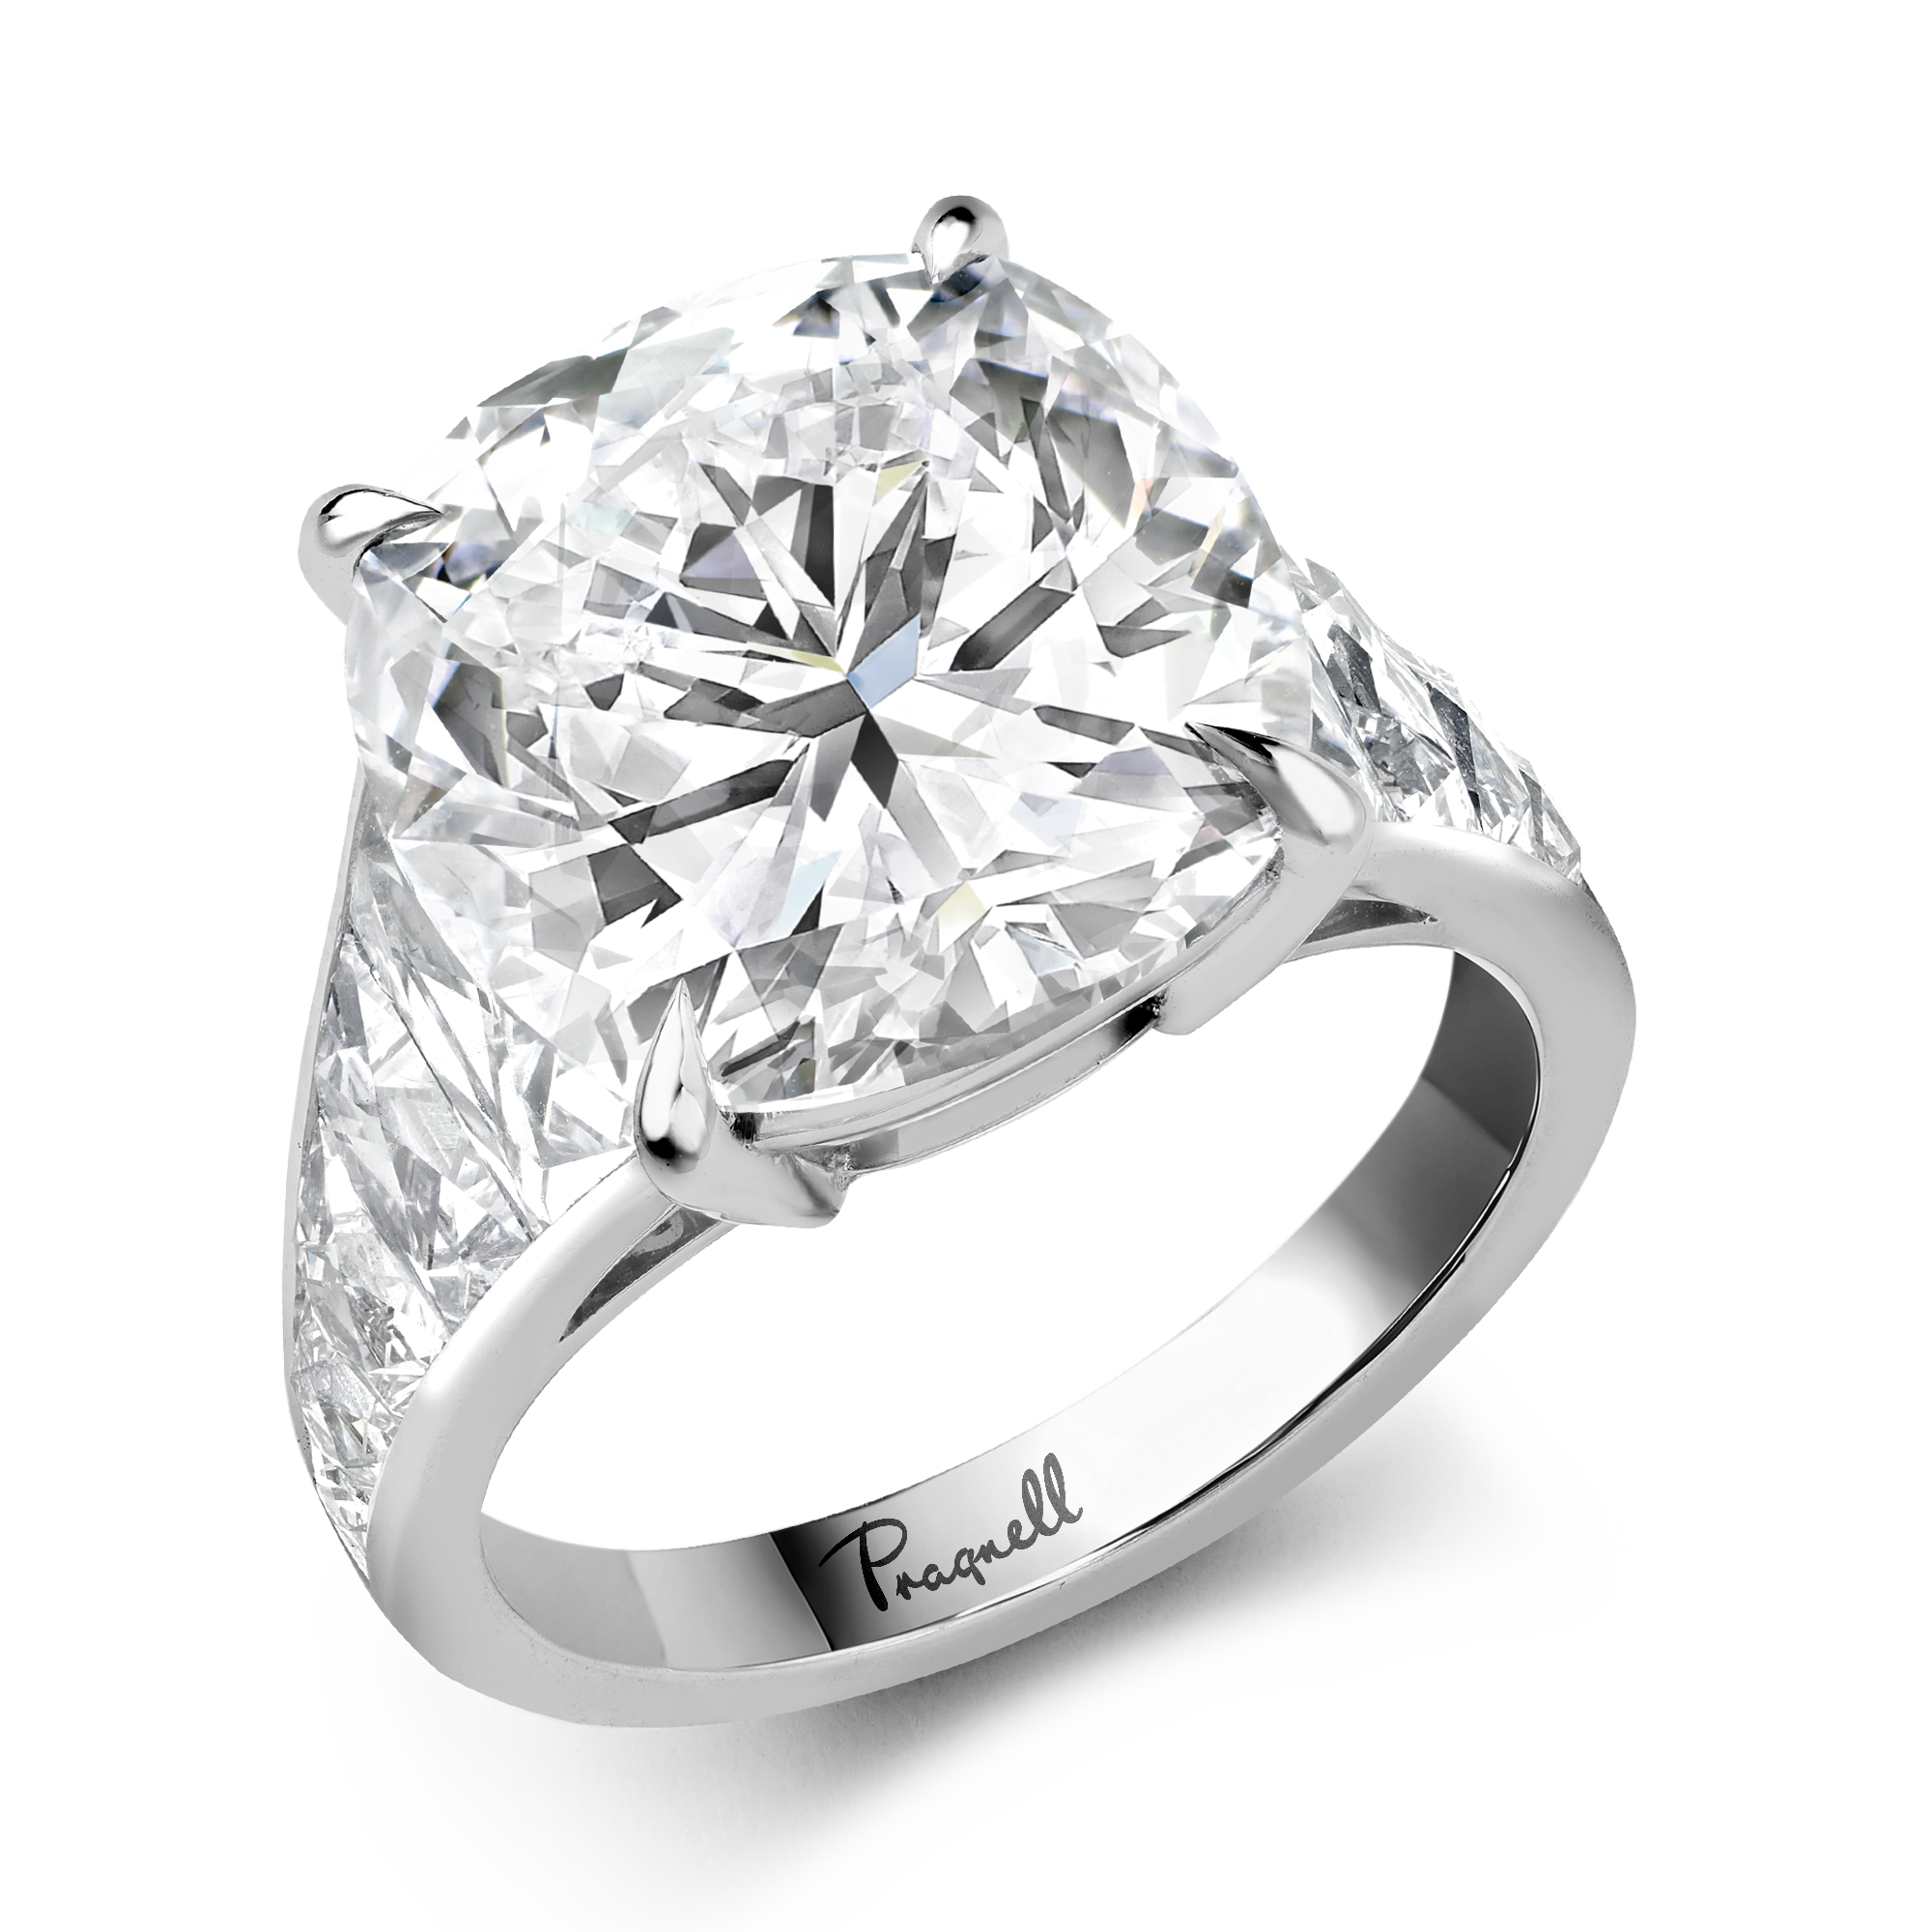 Masterpiece Pragnell Setting 10.07ct Diamond Solitaire Ring Cushion Antique Cut, Claw Set, GIA Certified_1